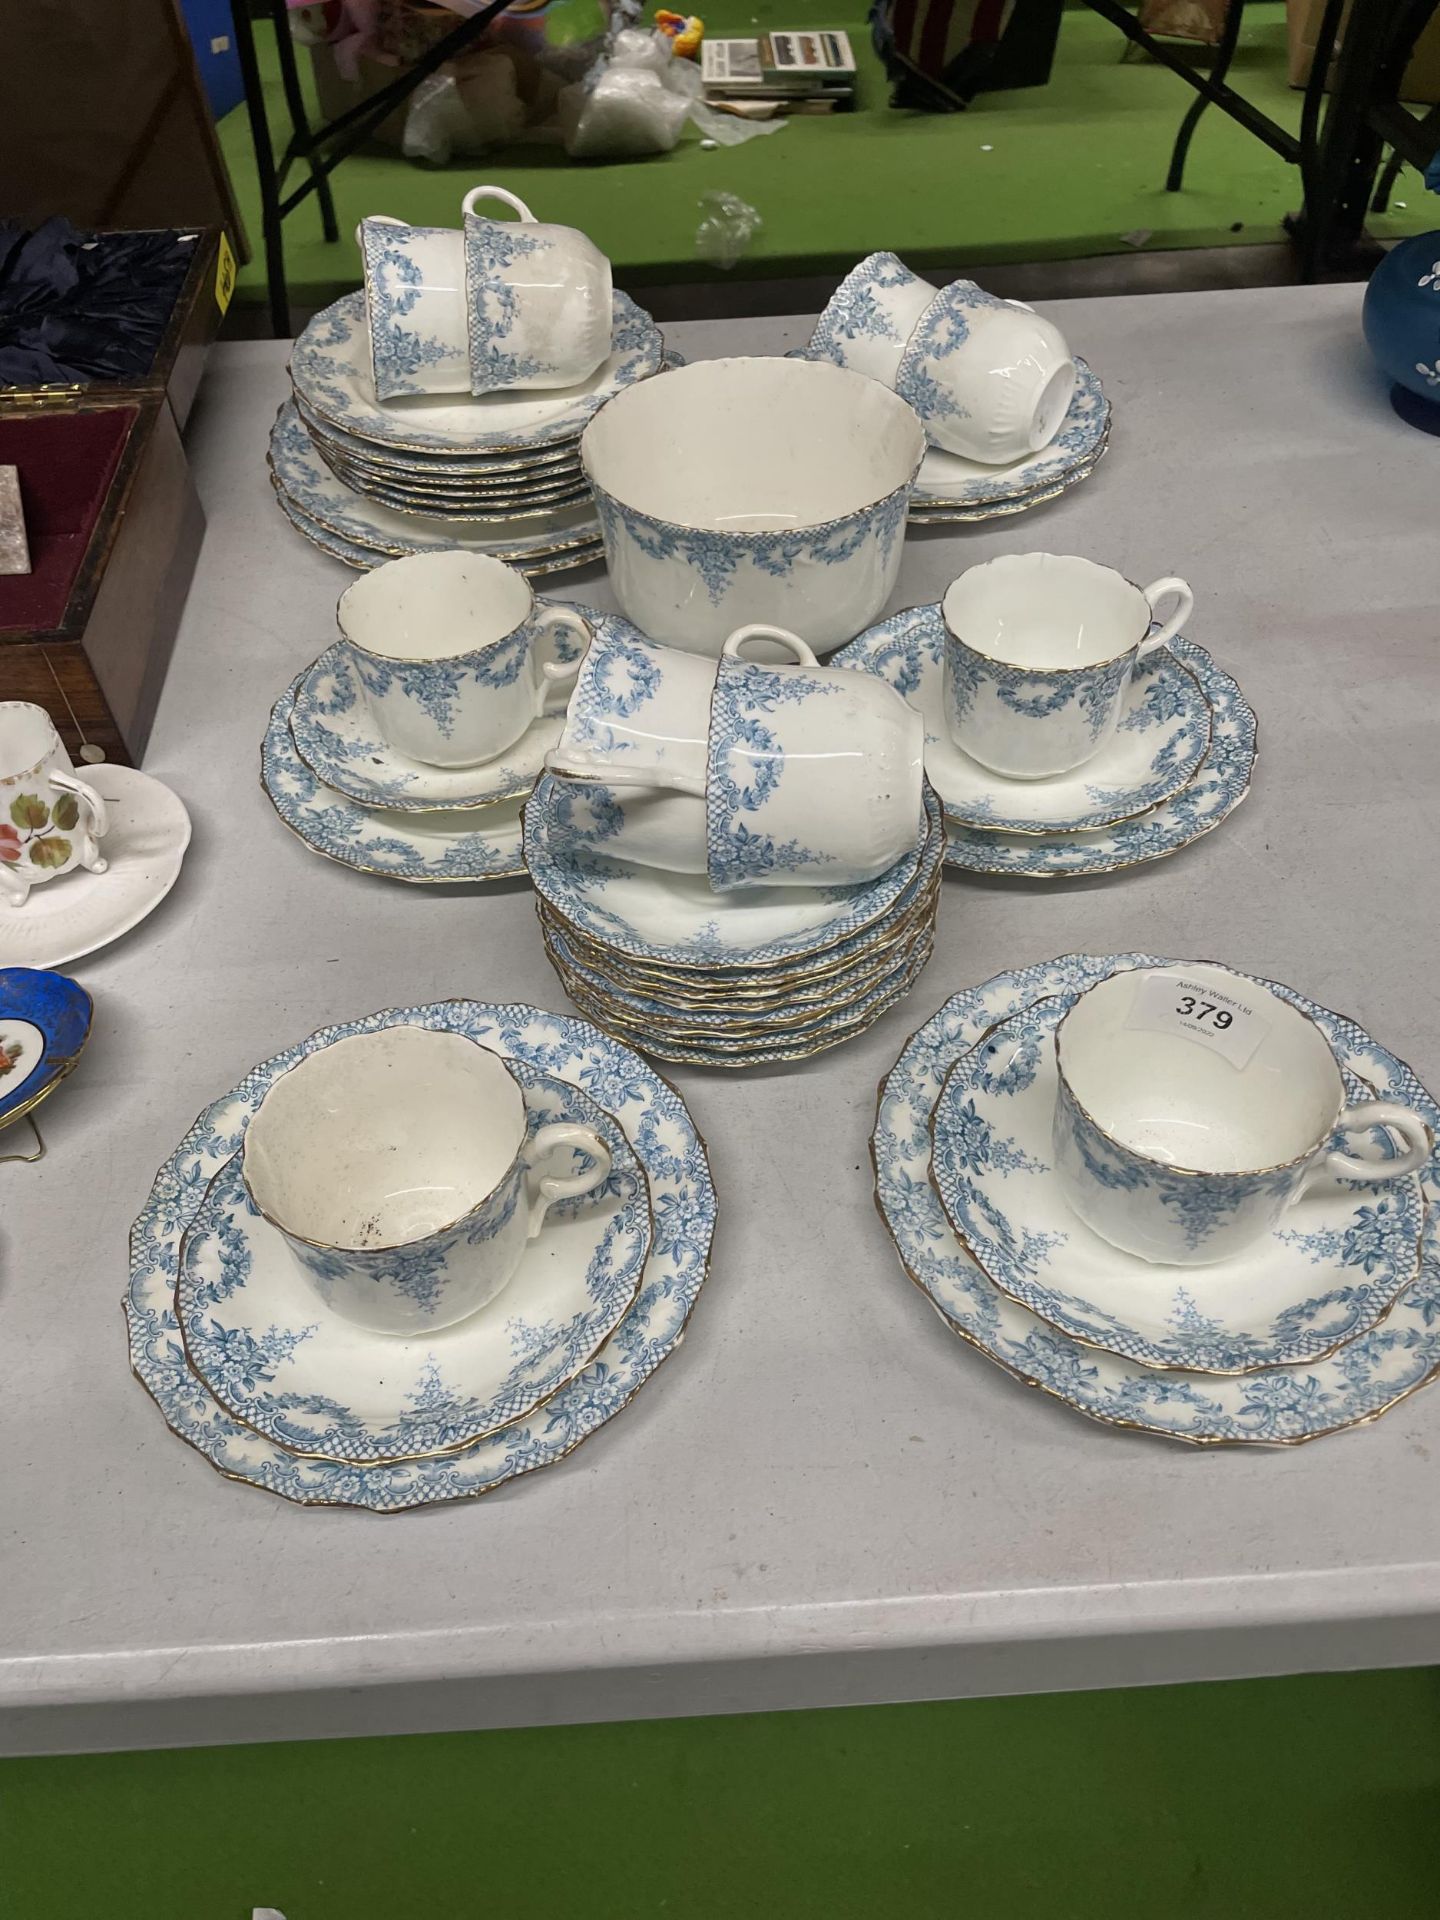 A QUANTITY OF BLUE AND WHITE CHINA TO INCLUDE CUPS, SAUCERS, SIDE PLATES, SUGAR BOWL, ETC